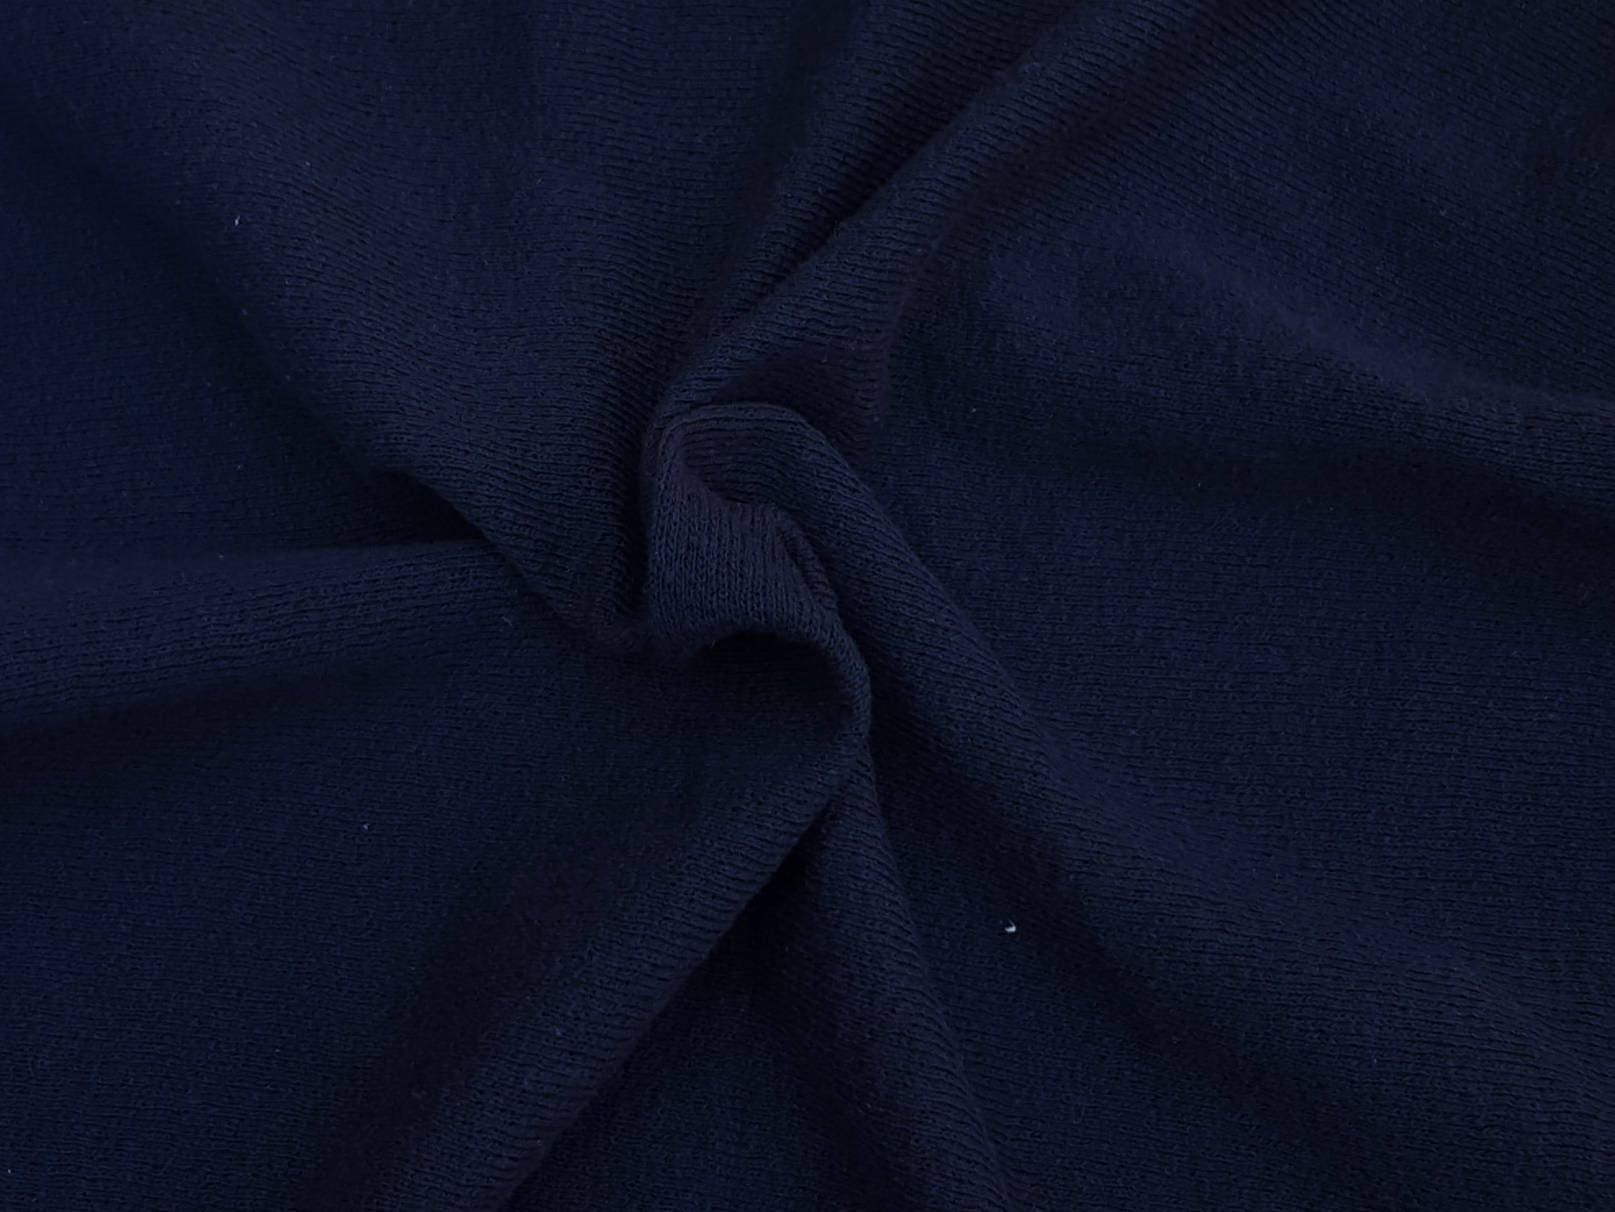 Dark Navy Cotton Knit Fabric by the Yard Double Crepe Heavy | Etsy